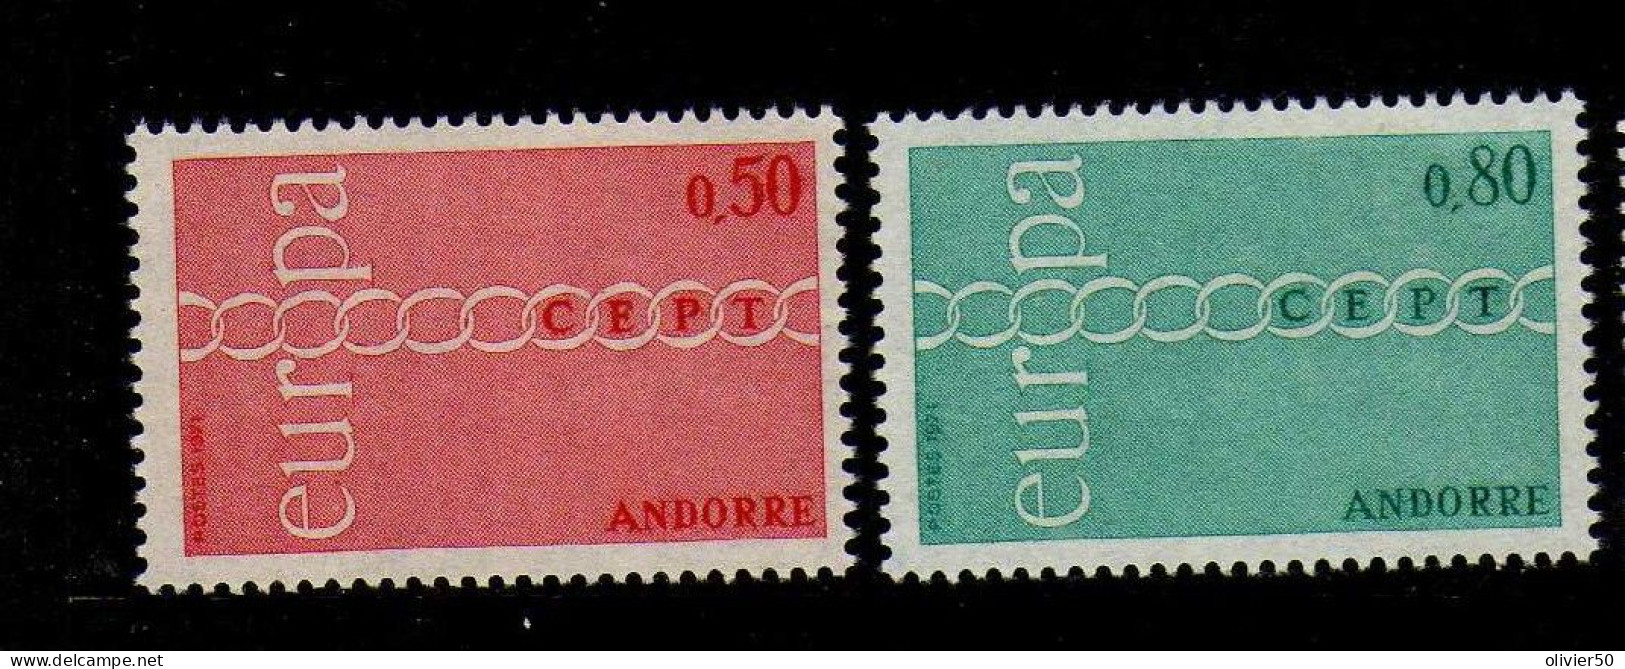 Andorre Francaise -  1971 - Europa  -Neufs** - MNH  - - Unused Stamps